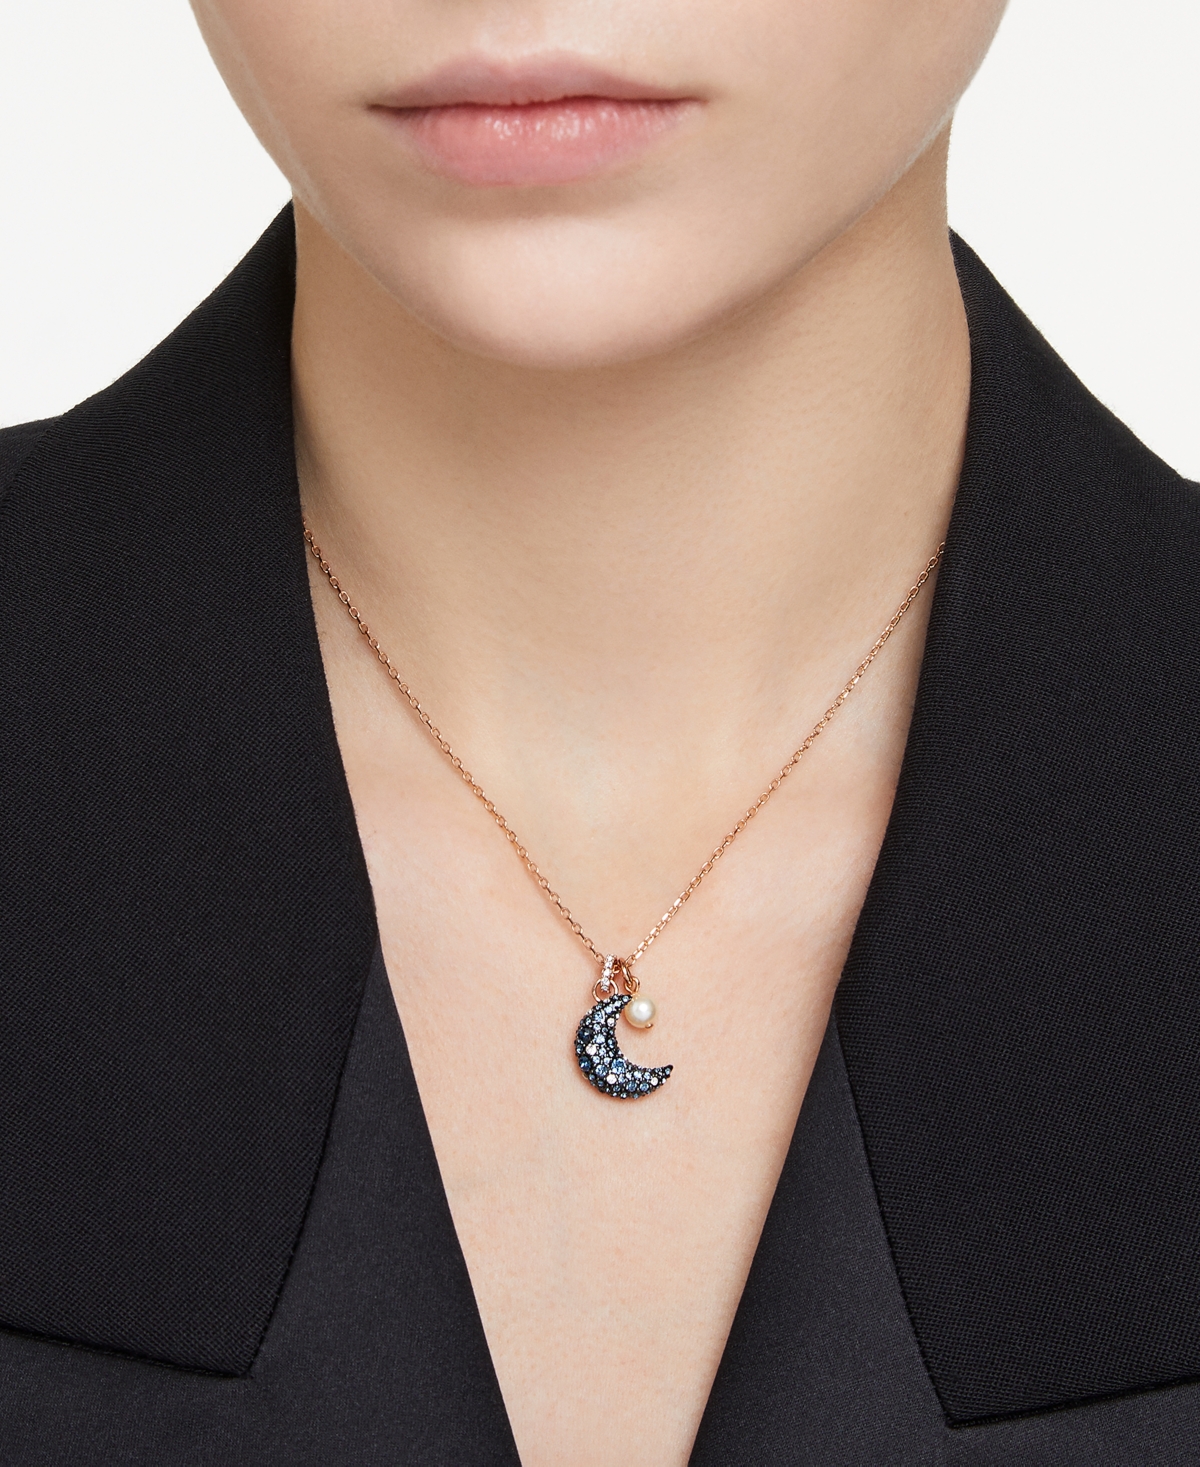 Shop Swarovski Rose Gold-tone Crystal Moon & Imitation Pearl Pendant Necklace, 15-3/4" + 2-3/4" Extender In Multicolored